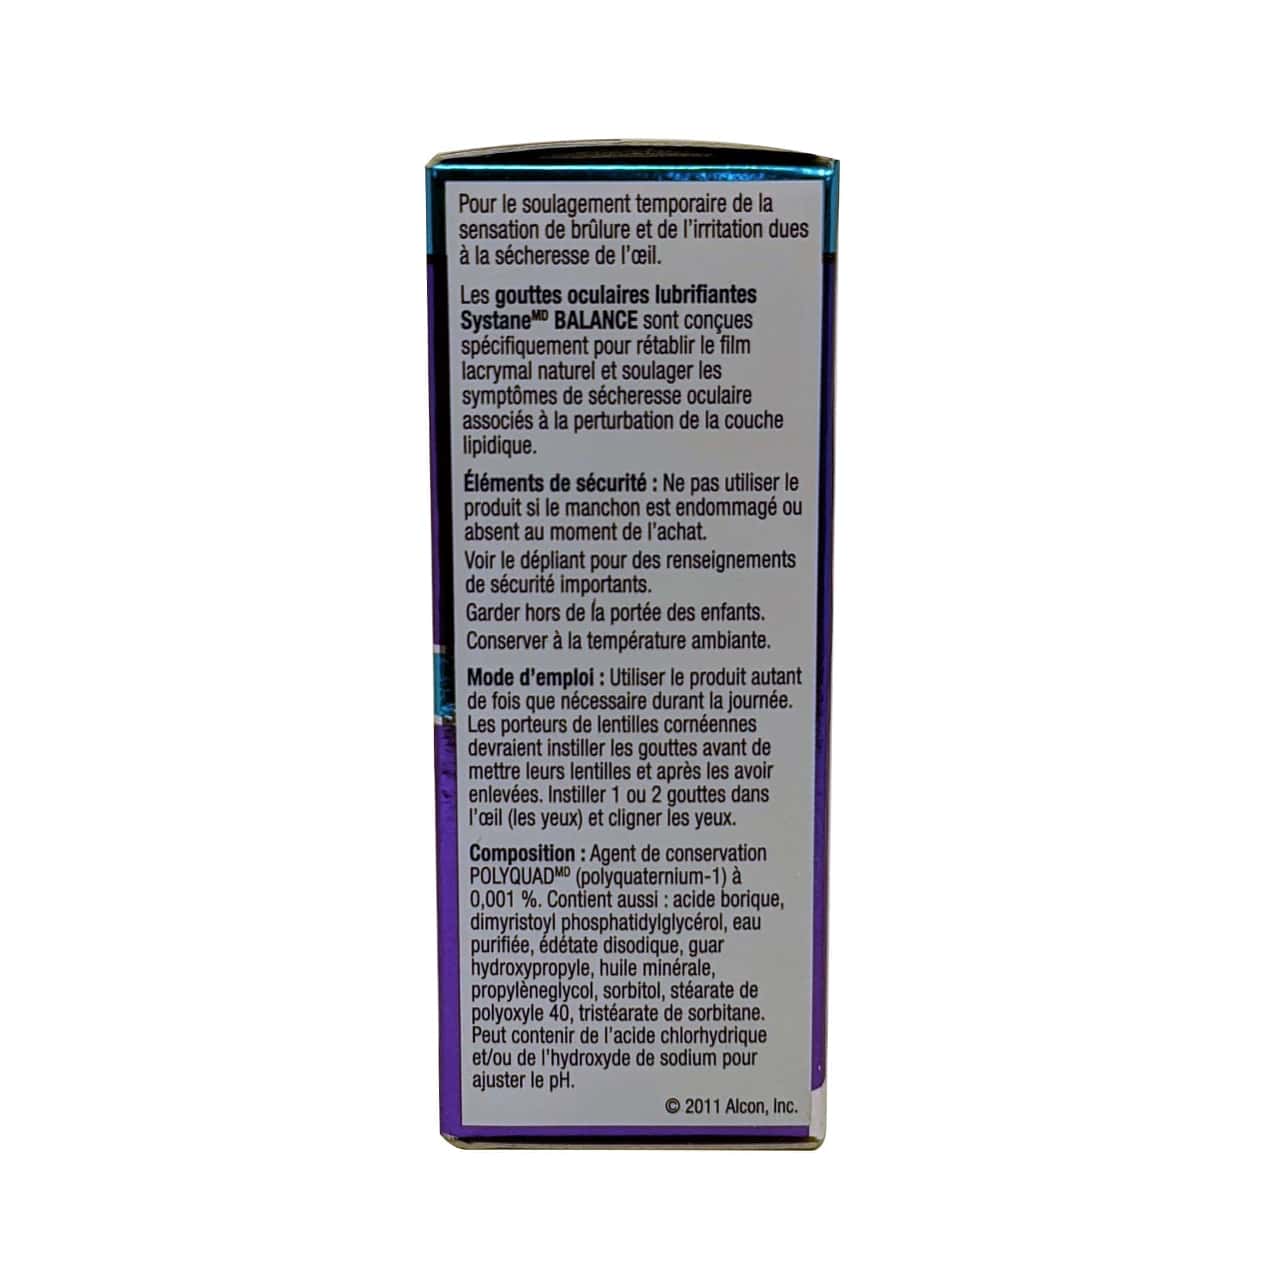 Product description, ingredients, directions, and warnings for Alcon Systane Balance Lipid Layer Formula Lubricant Eye Drops in French